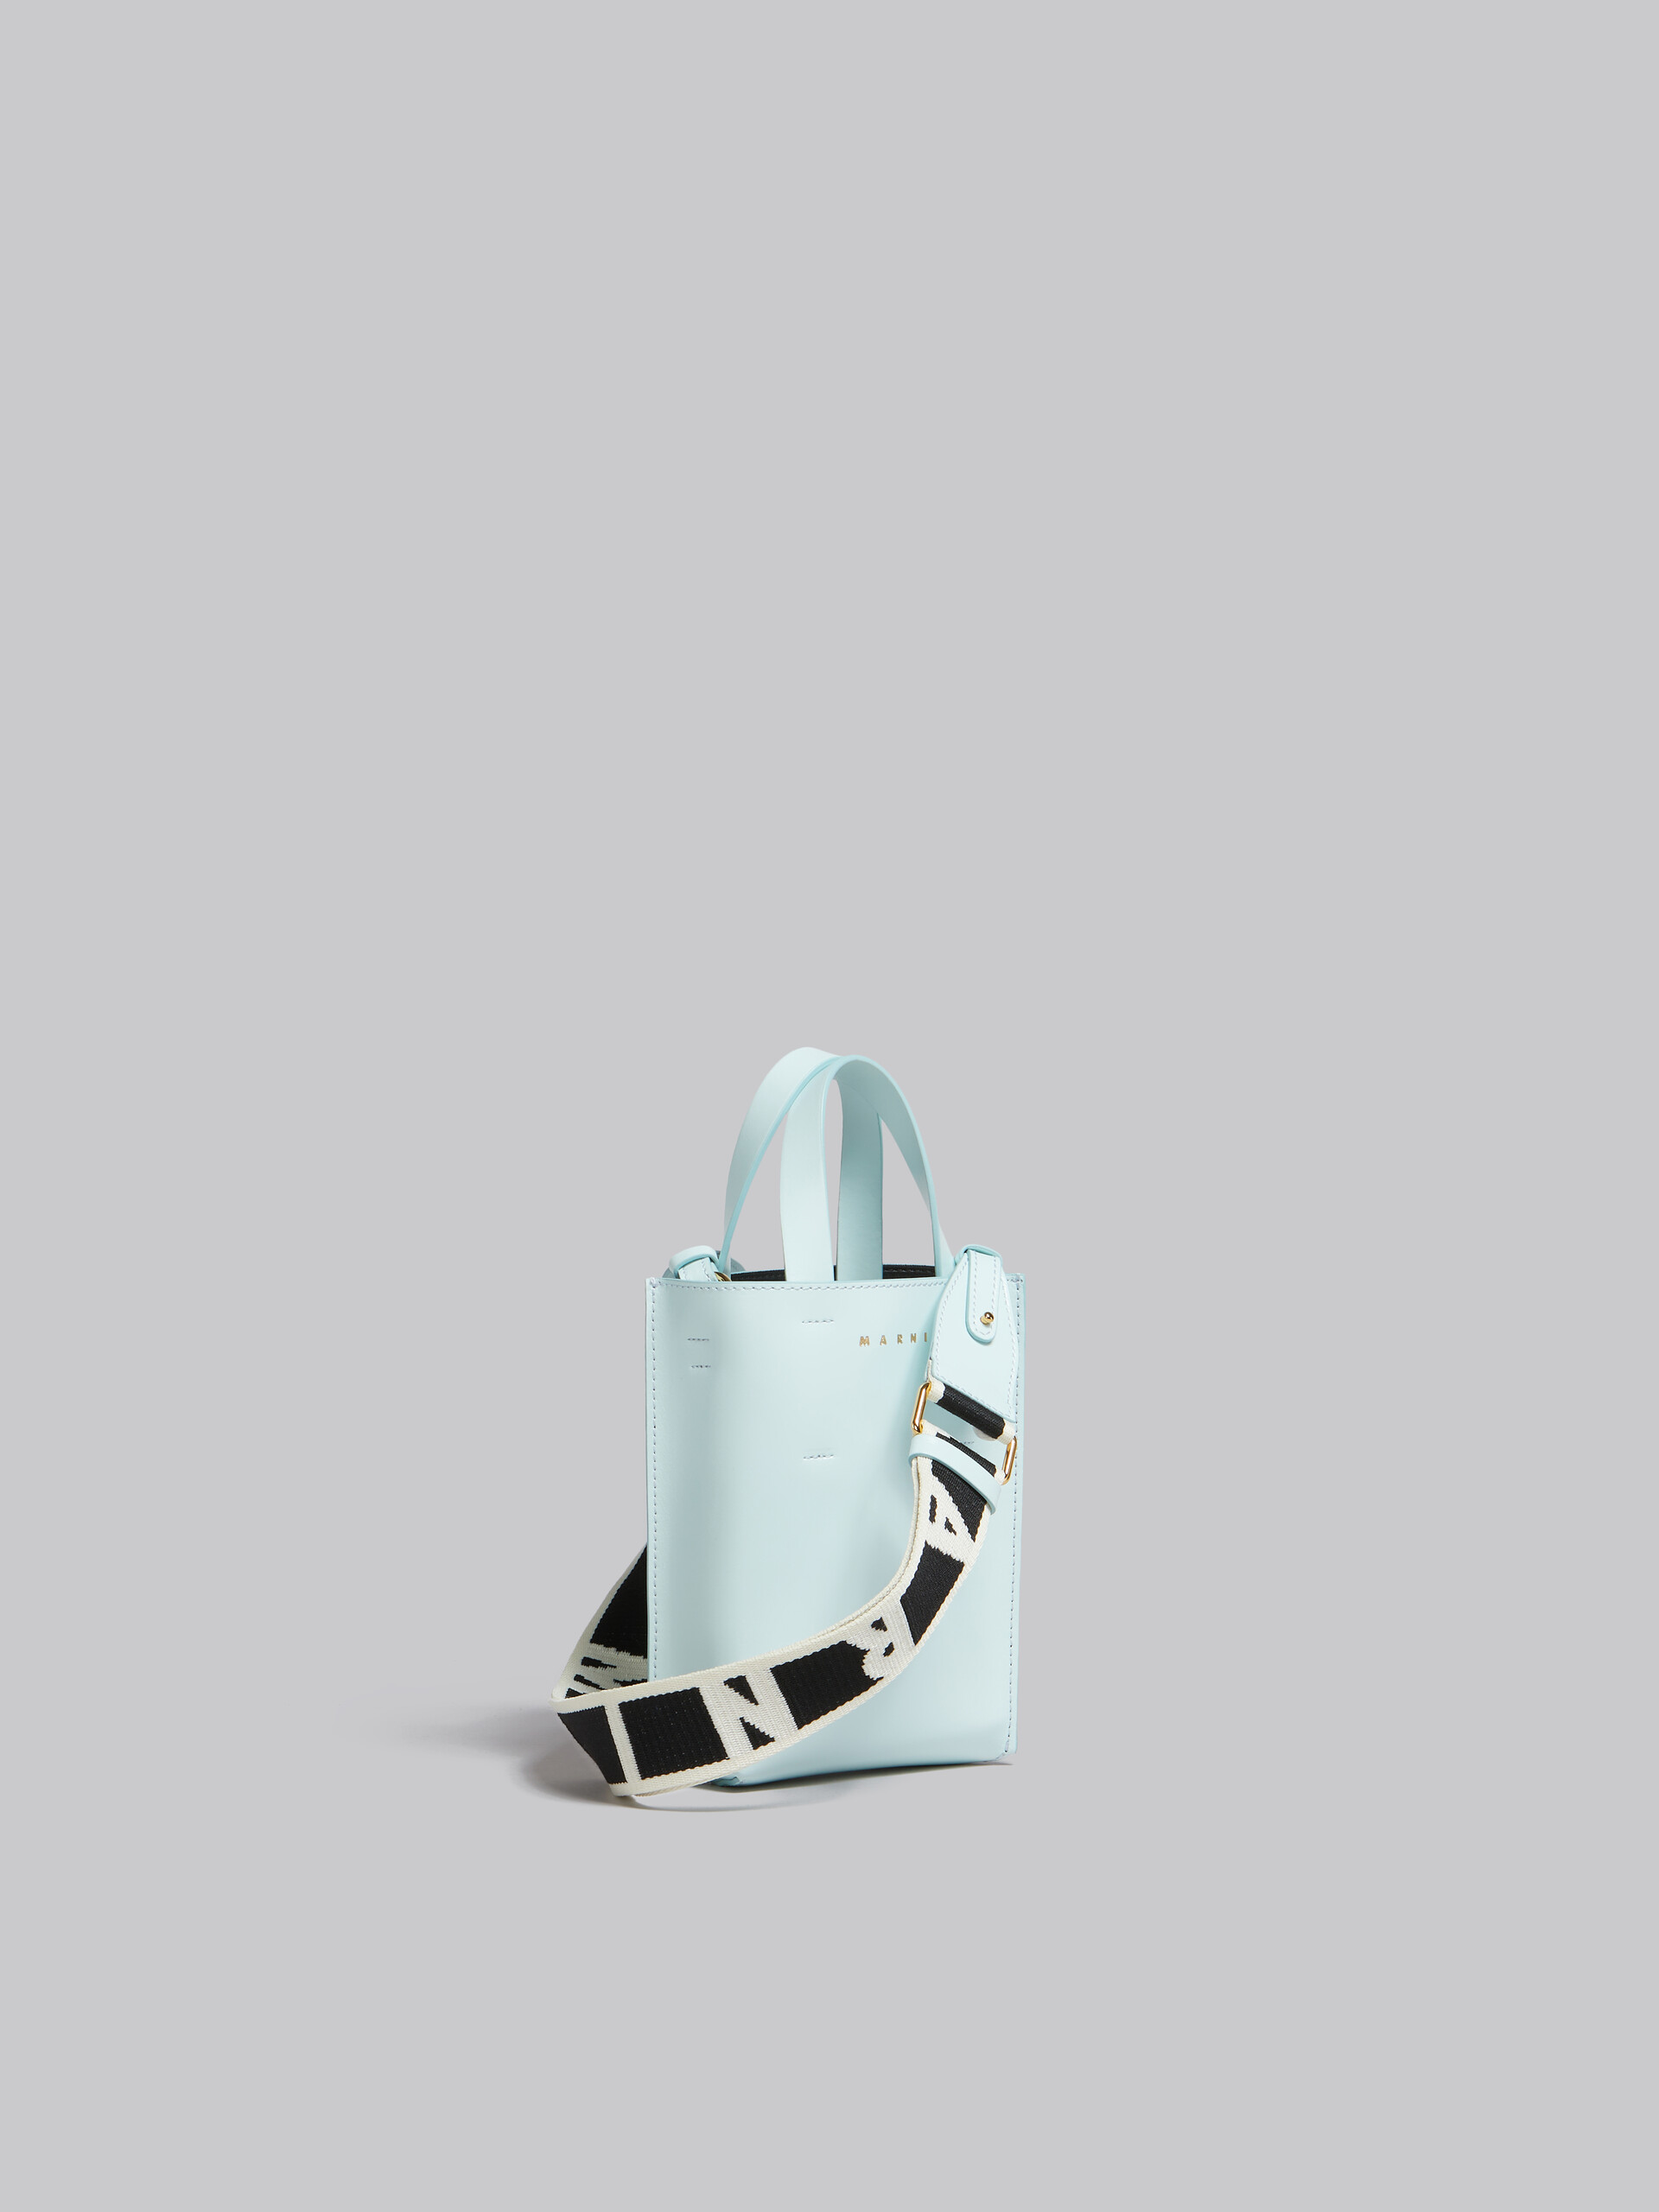 MUSEO nano bag in light blue leather - Shopping Bags - Image 6